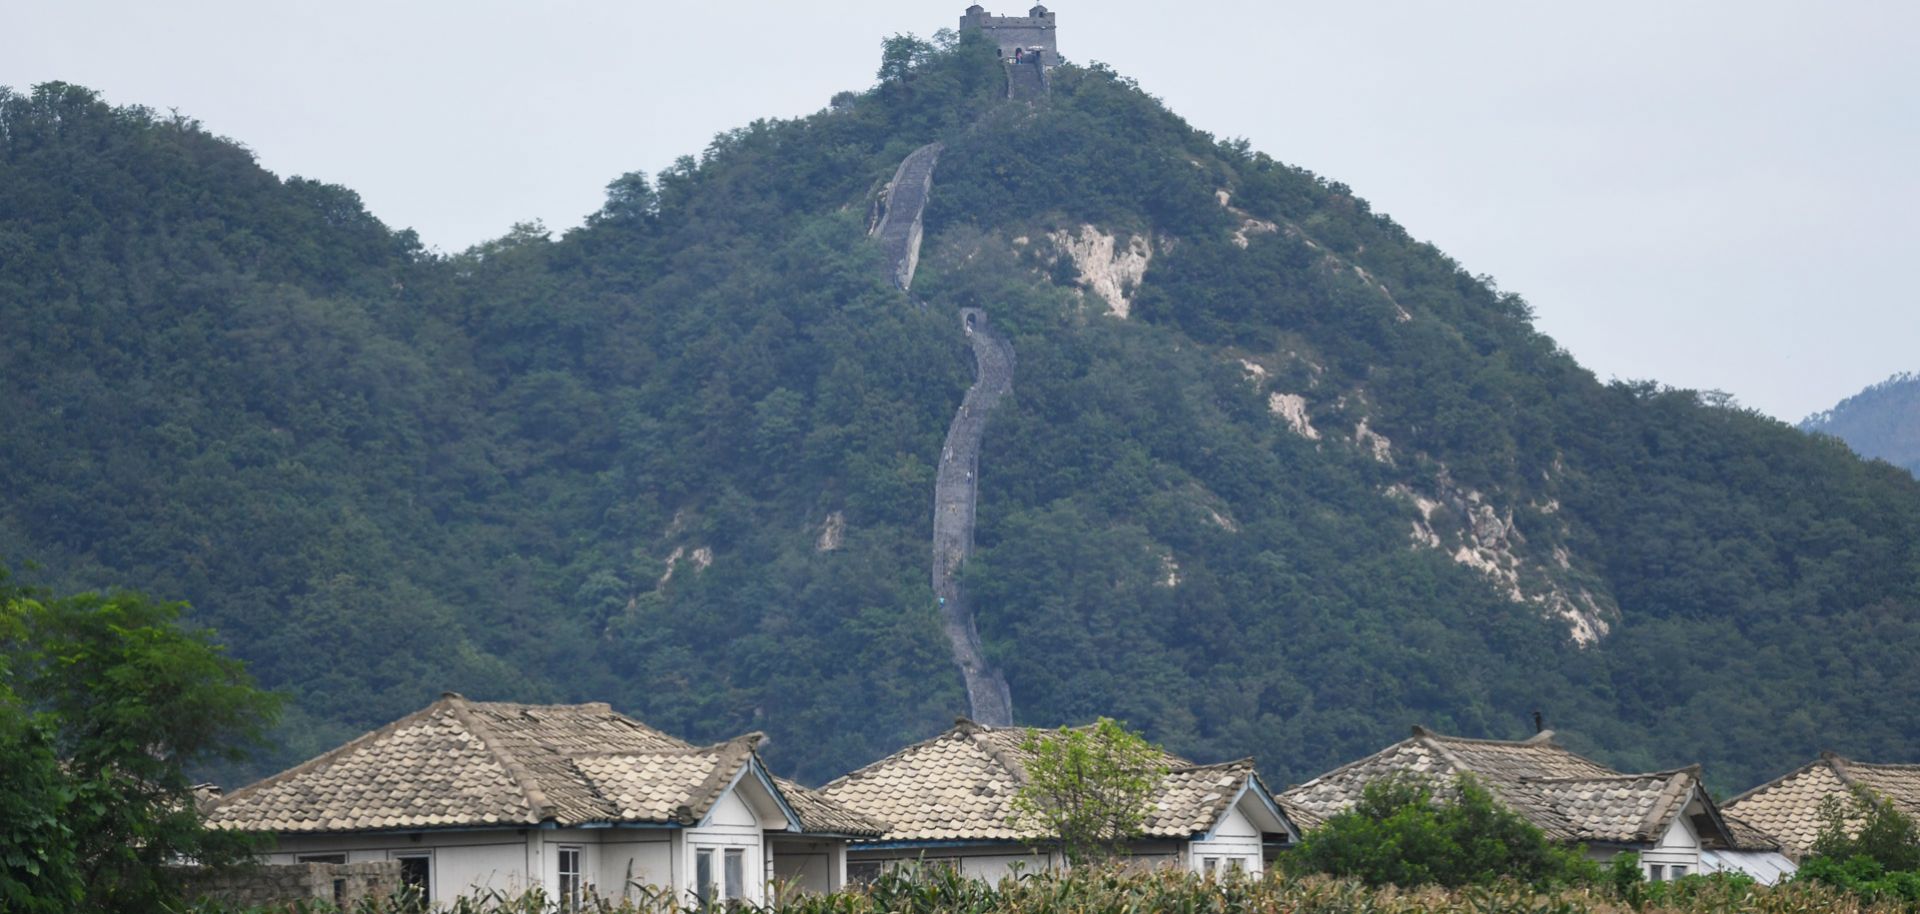 North Korean houses rest in front of the Great Wall of China near the town of Sinuiju. 